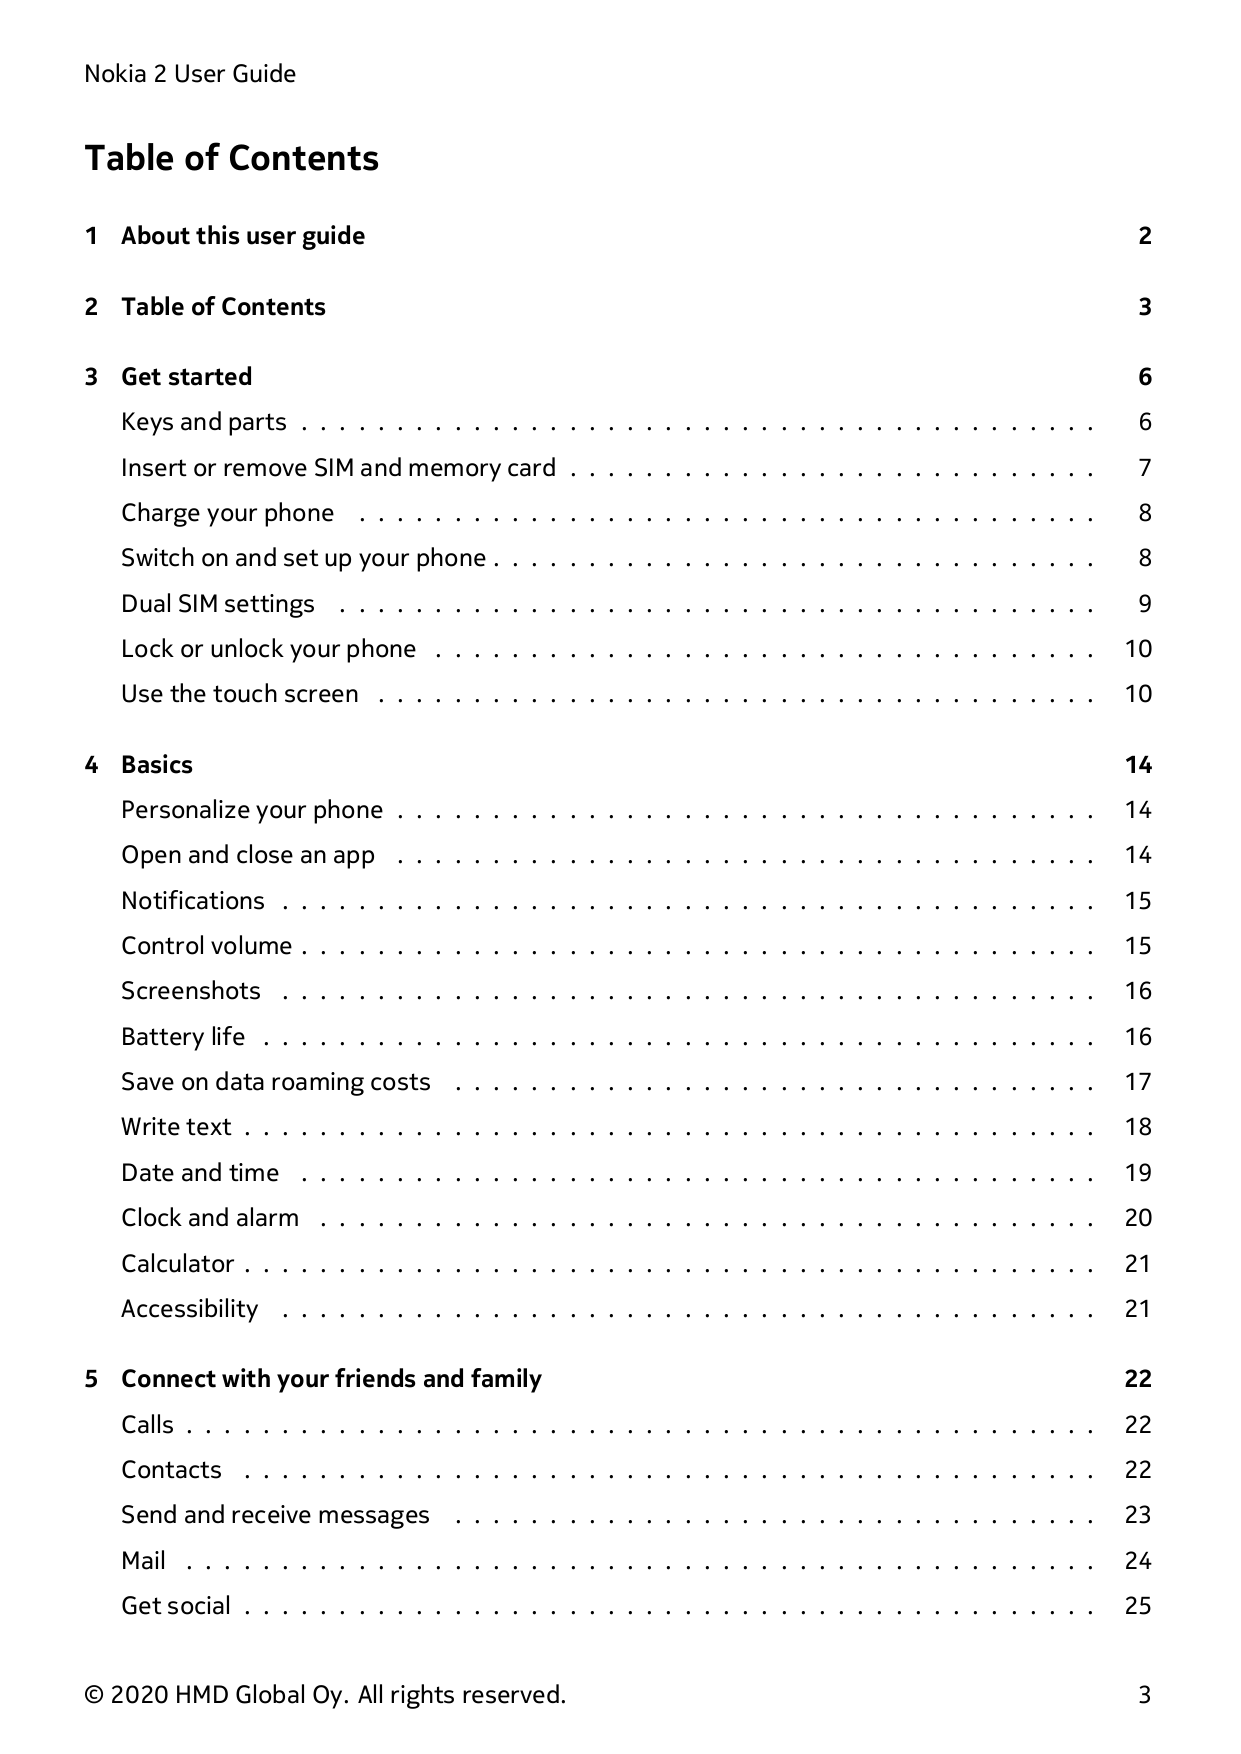 Nokia 2 User GuideTable of Contents1 About this user guide22 Table of Contents33 Get started6Keys and parts . . . . . . . . . . 